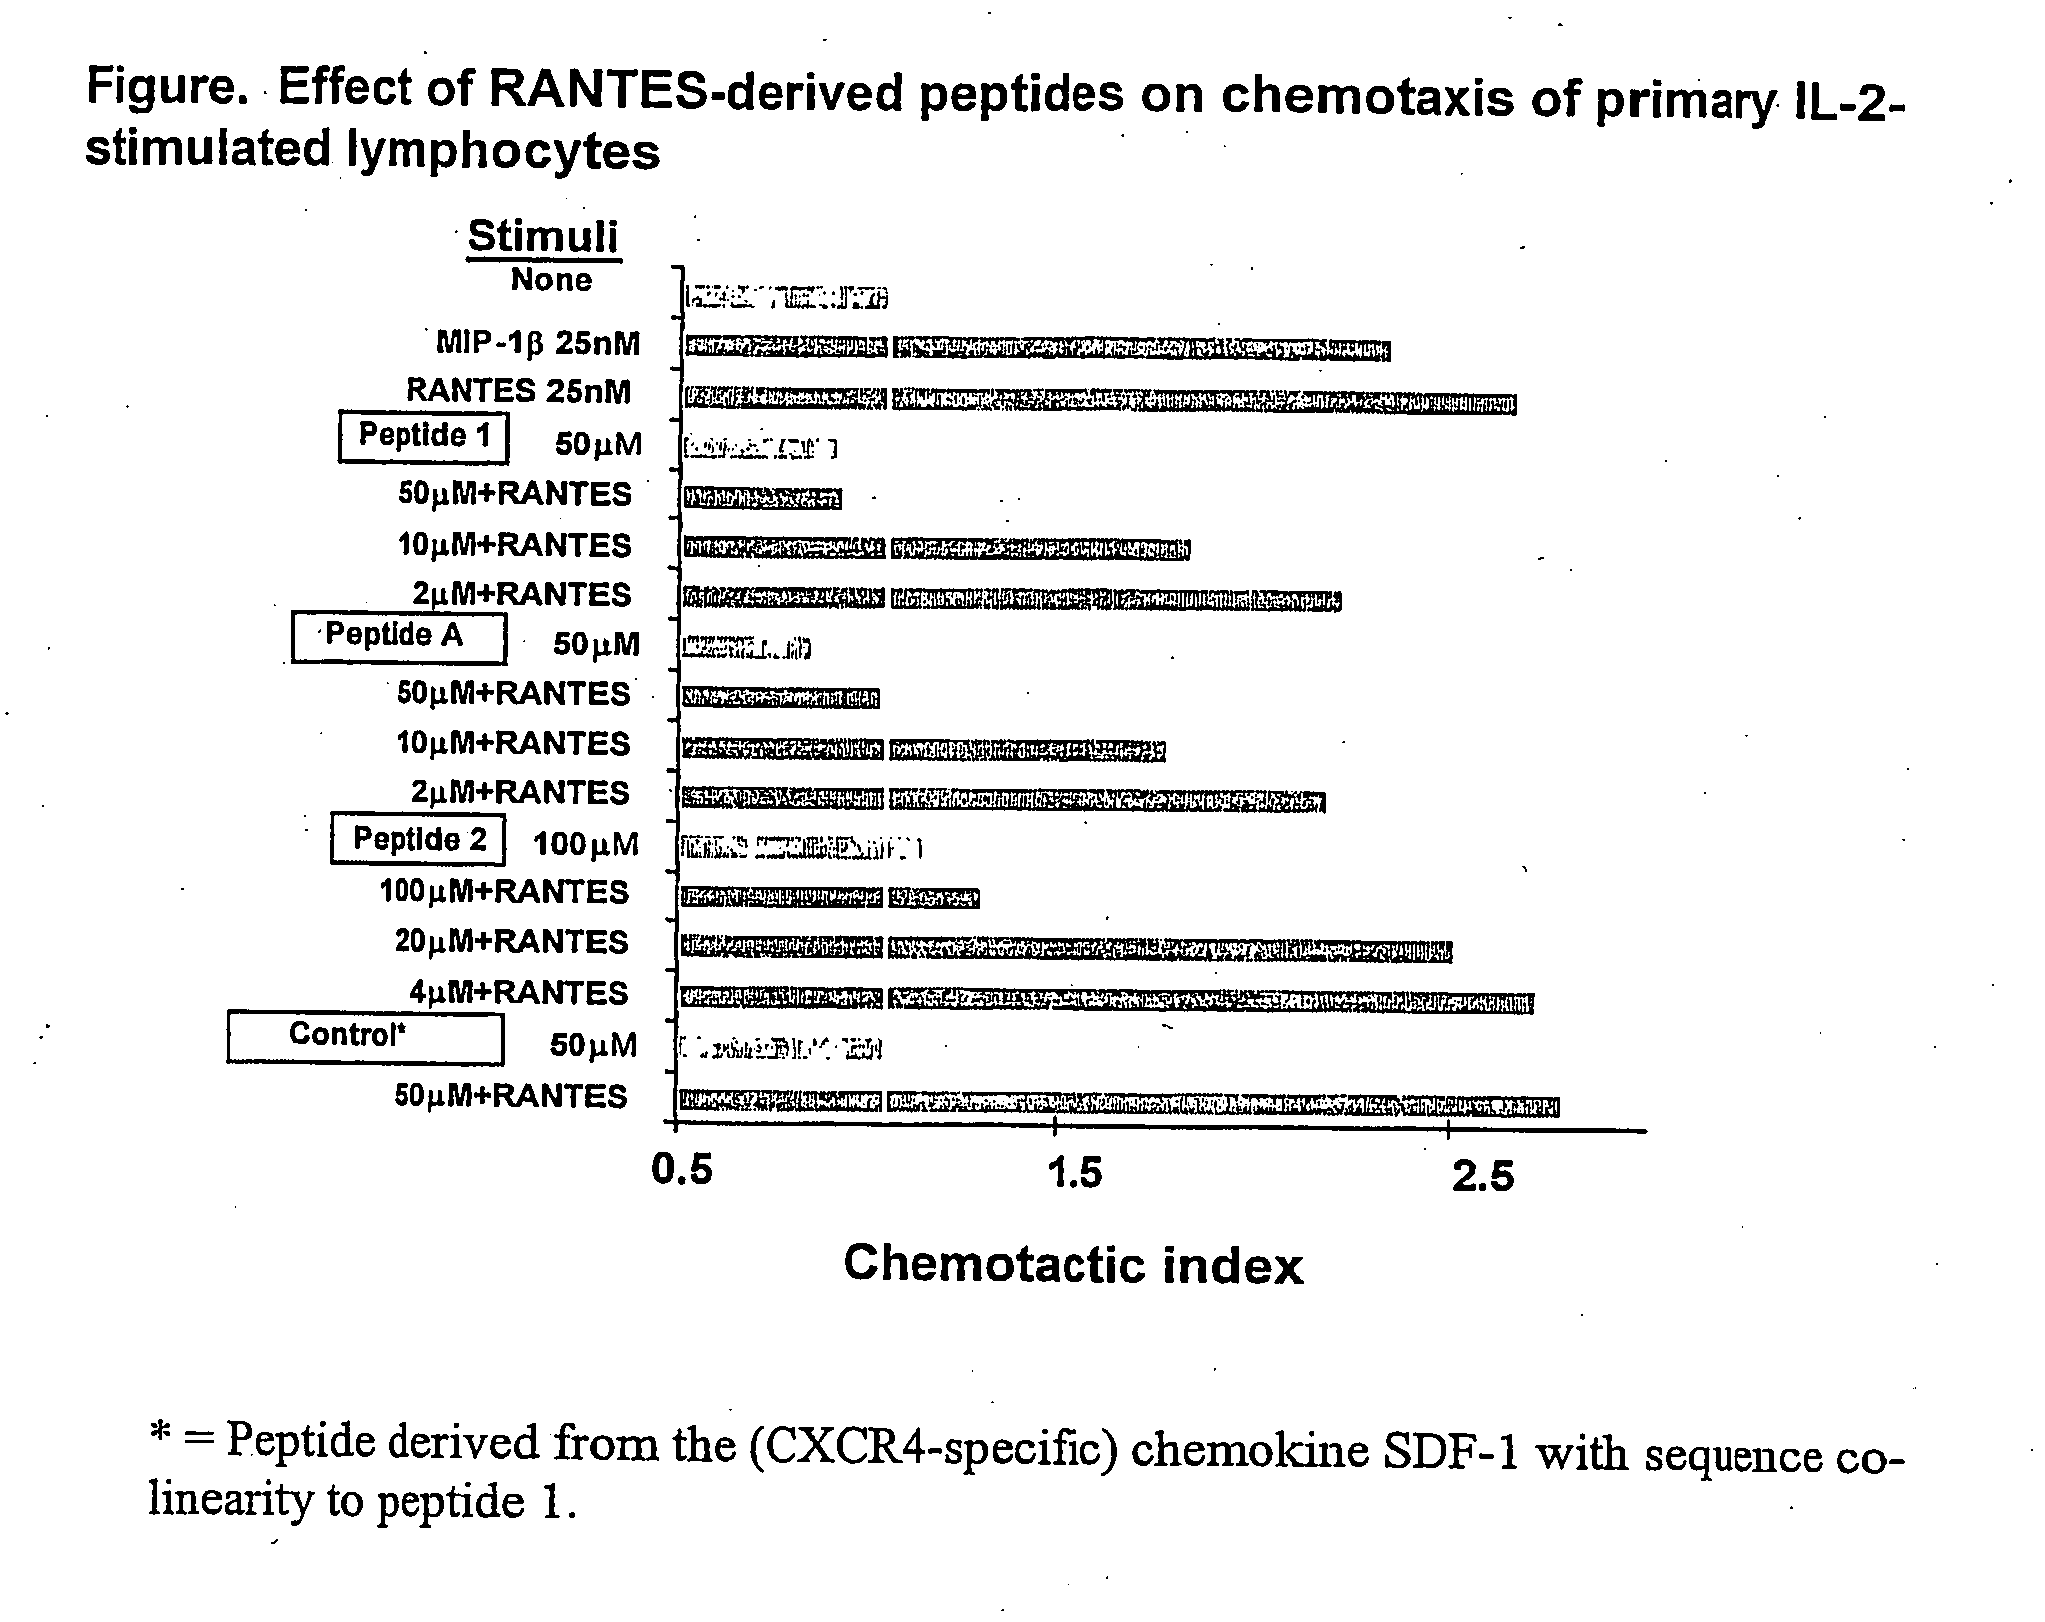 Rantes-derived peptides with anti-hiv activity